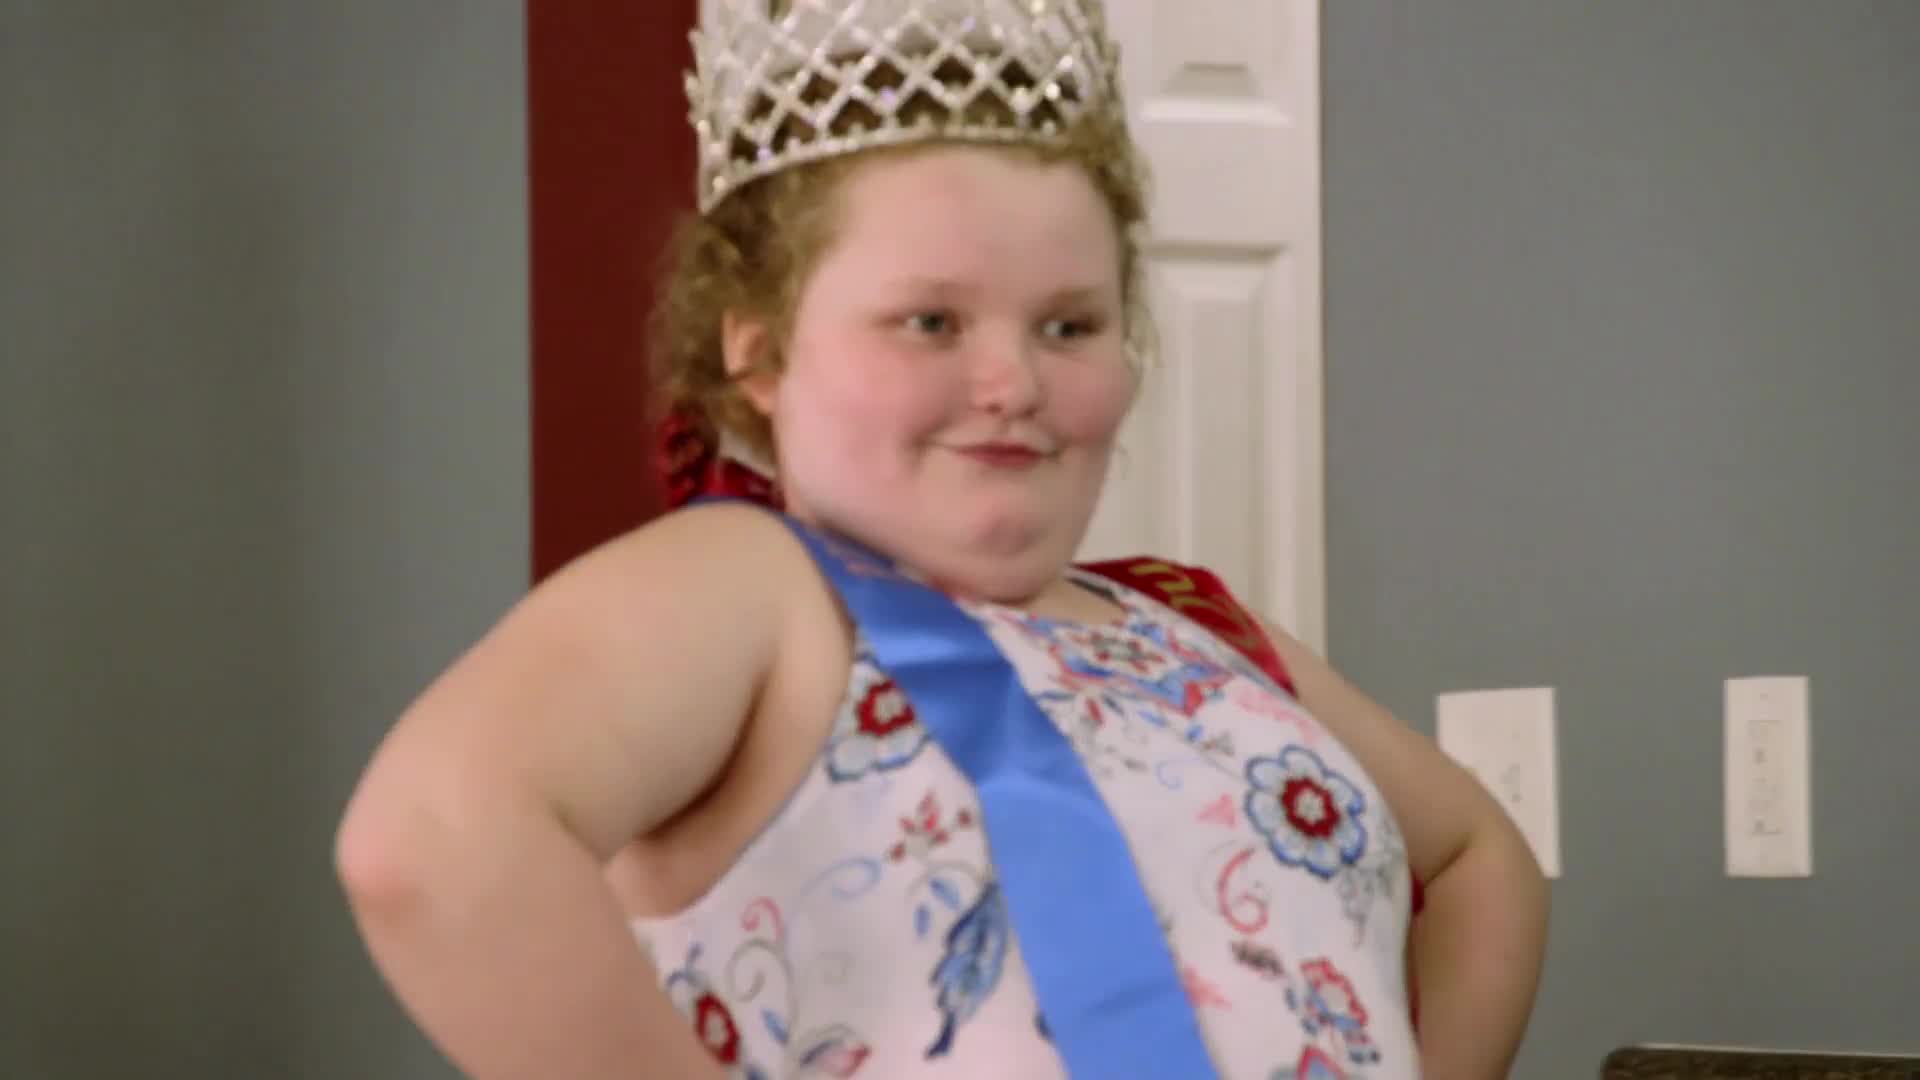 Catch Up with Honey Boo Boo!